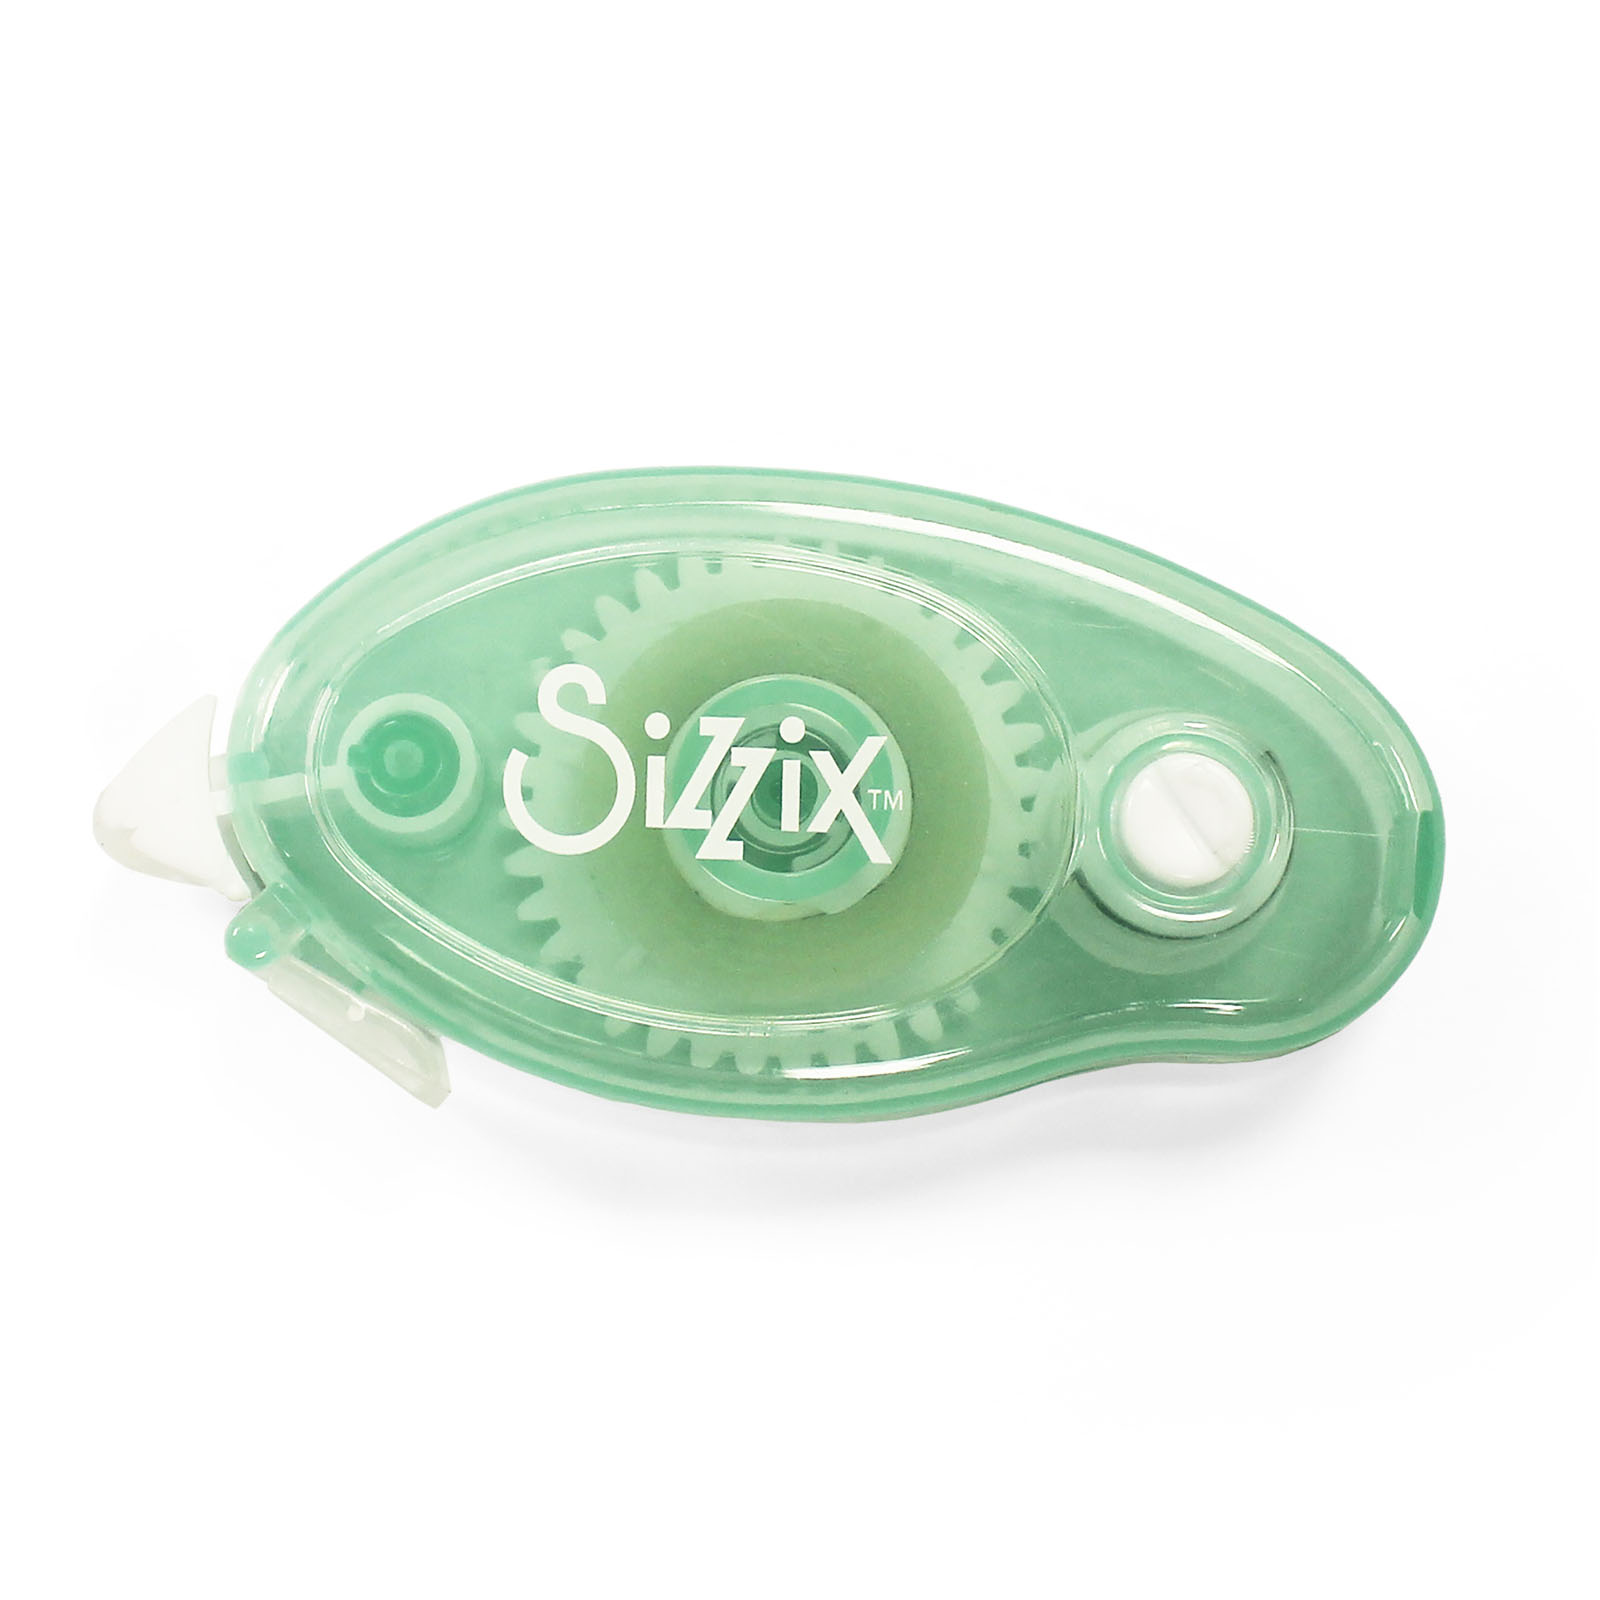 Sizzix • Making essential permanent adhesive roller